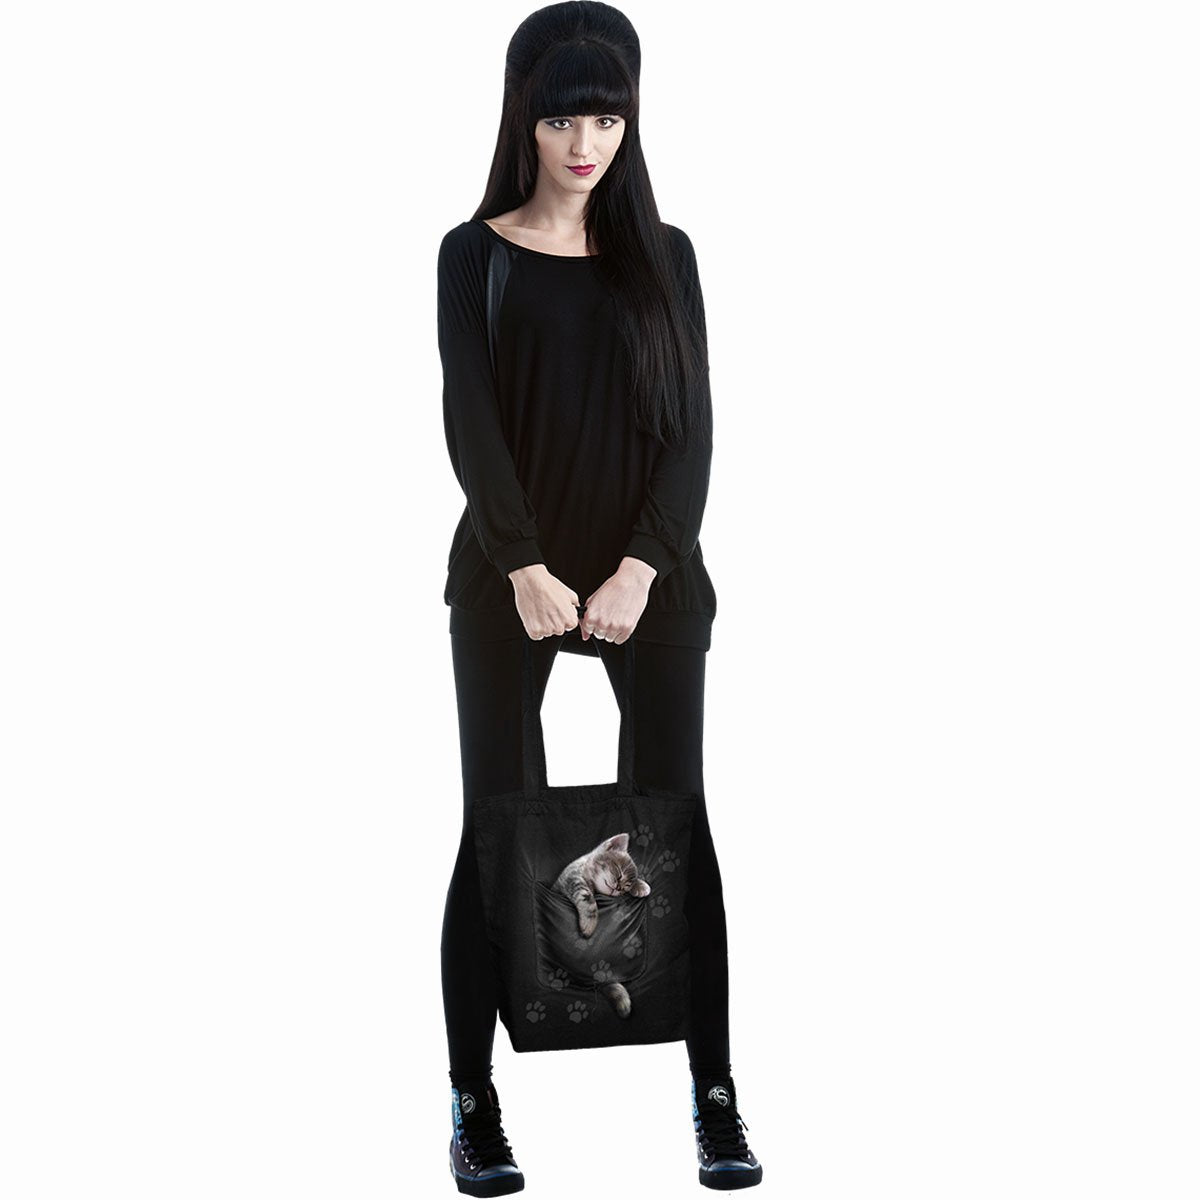 gothic woman holding black tote bag with pocket cat design